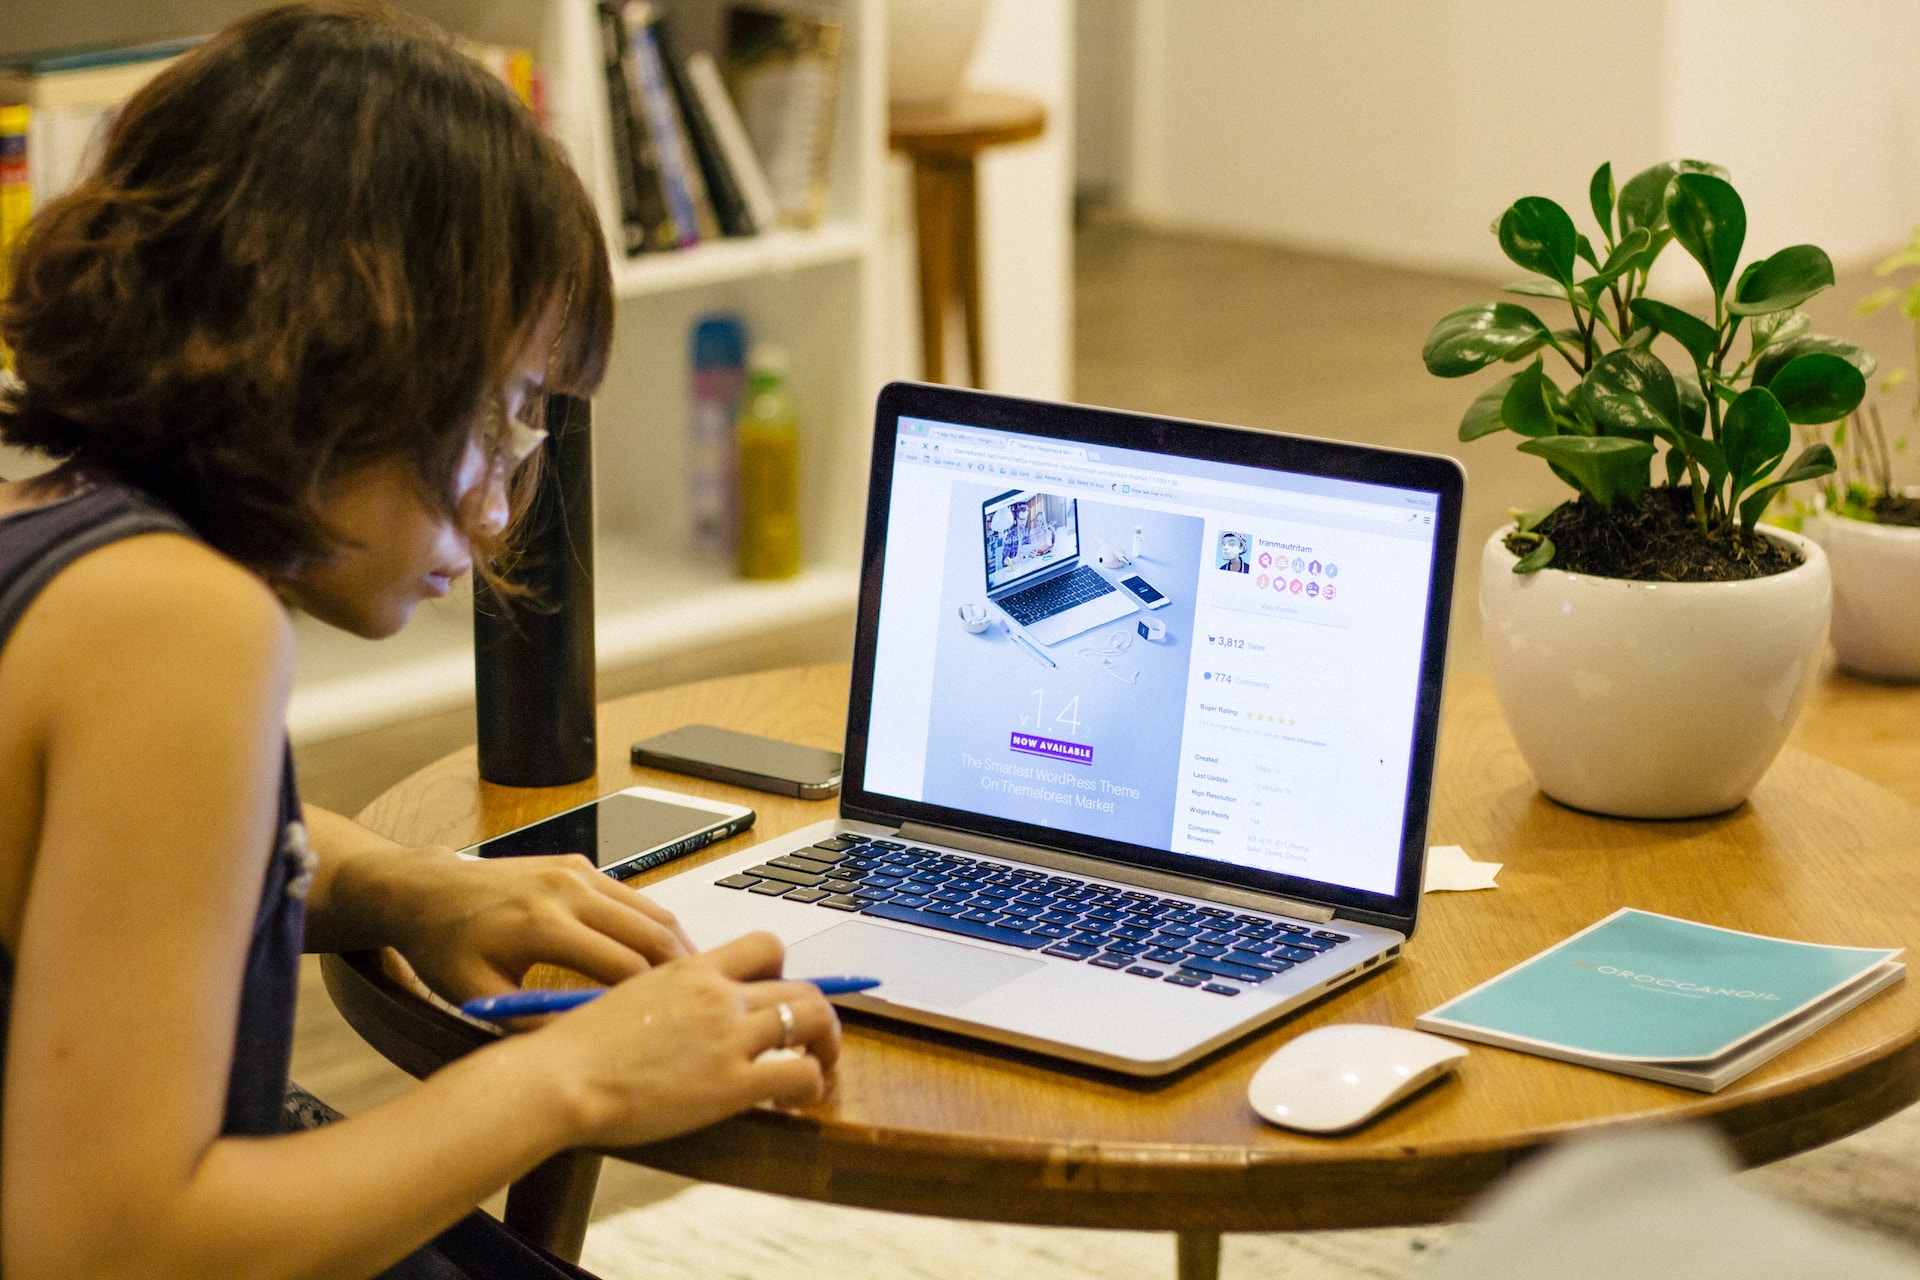 Asian woman with glasses using a laptop on a light wood table with a plant.